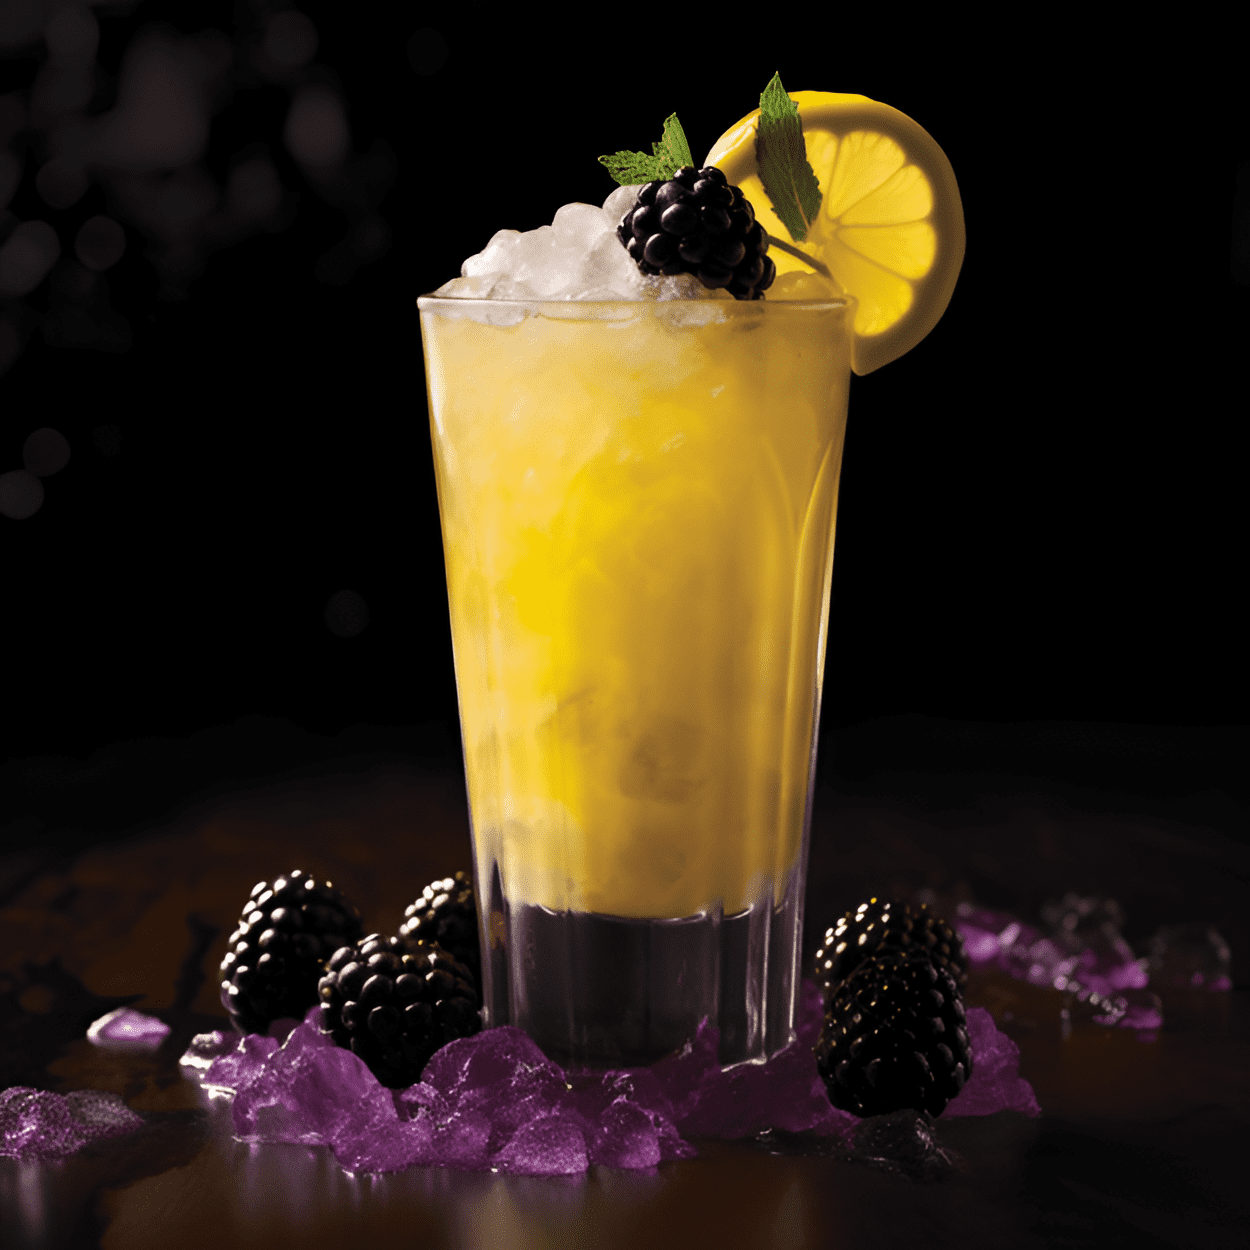 Passion Fruit Bramble Cocktail Recipe - The Passion Fruit Bramble is a delightful mix of sweet, sour, and slightly bitter flavors. The sweetness of the passion fruit and simple syrup is balanced by the tartness of the lemon juice, while the gin adds a subtle bitterness that complements the fruitiness of the cocktail. It's a refreshing and invigorating drink that leaves a pleasant aftertaste.